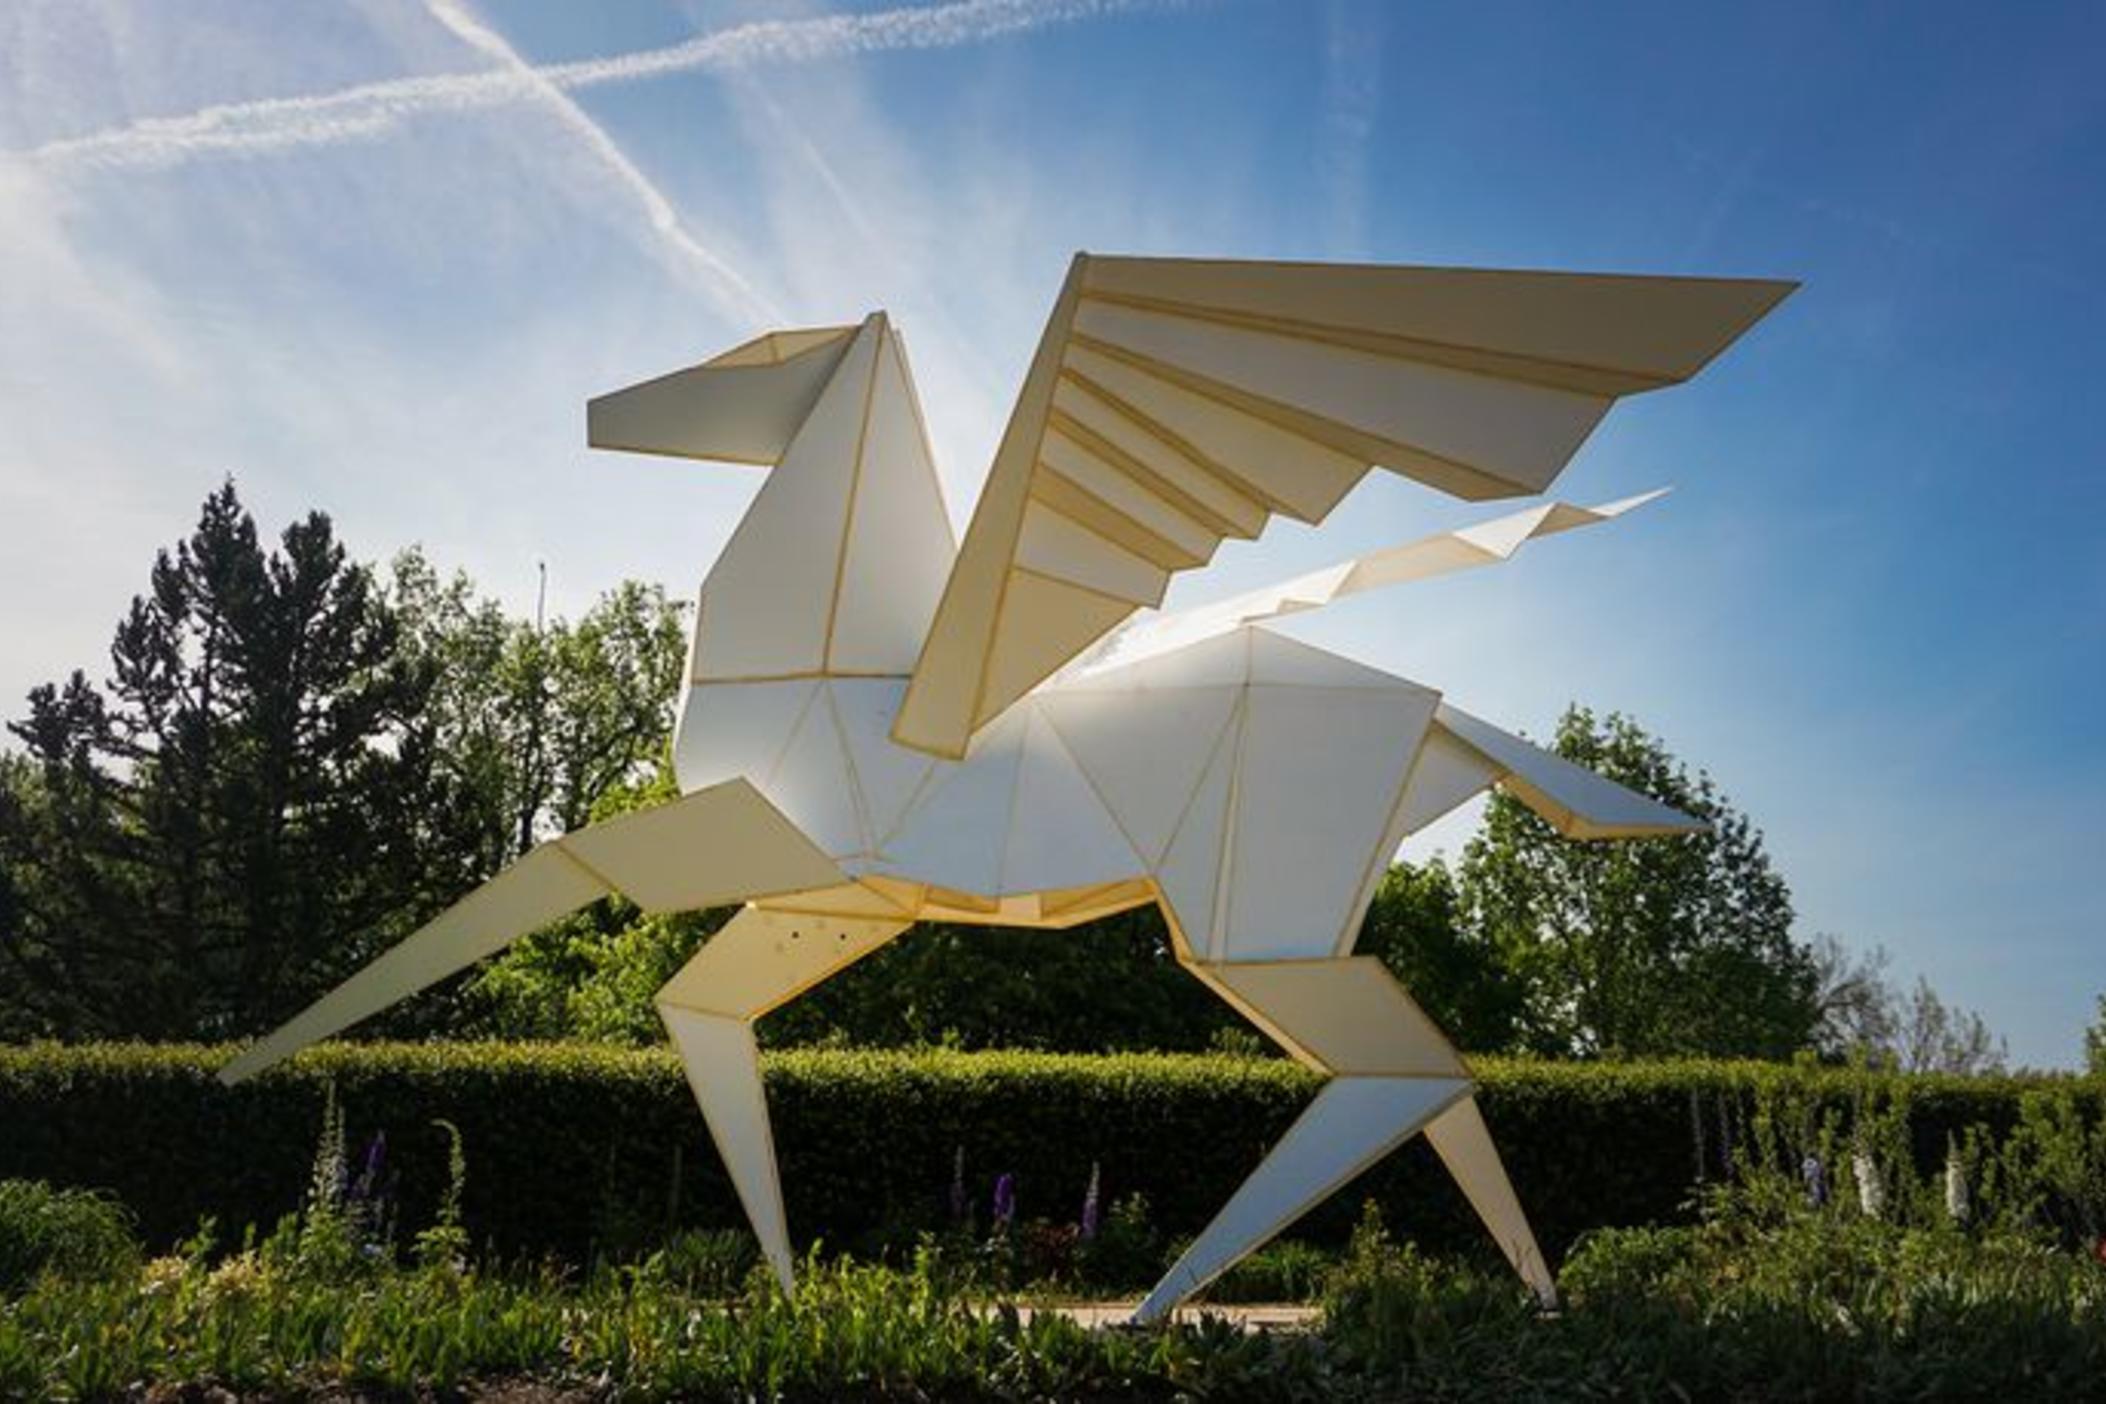 Over 70 metal renderings of origami figures were displayed at the Atlanta Botanical Gardens from June through October 2022. The exhibition  was funded, in part, though money from Fulton County Arts.